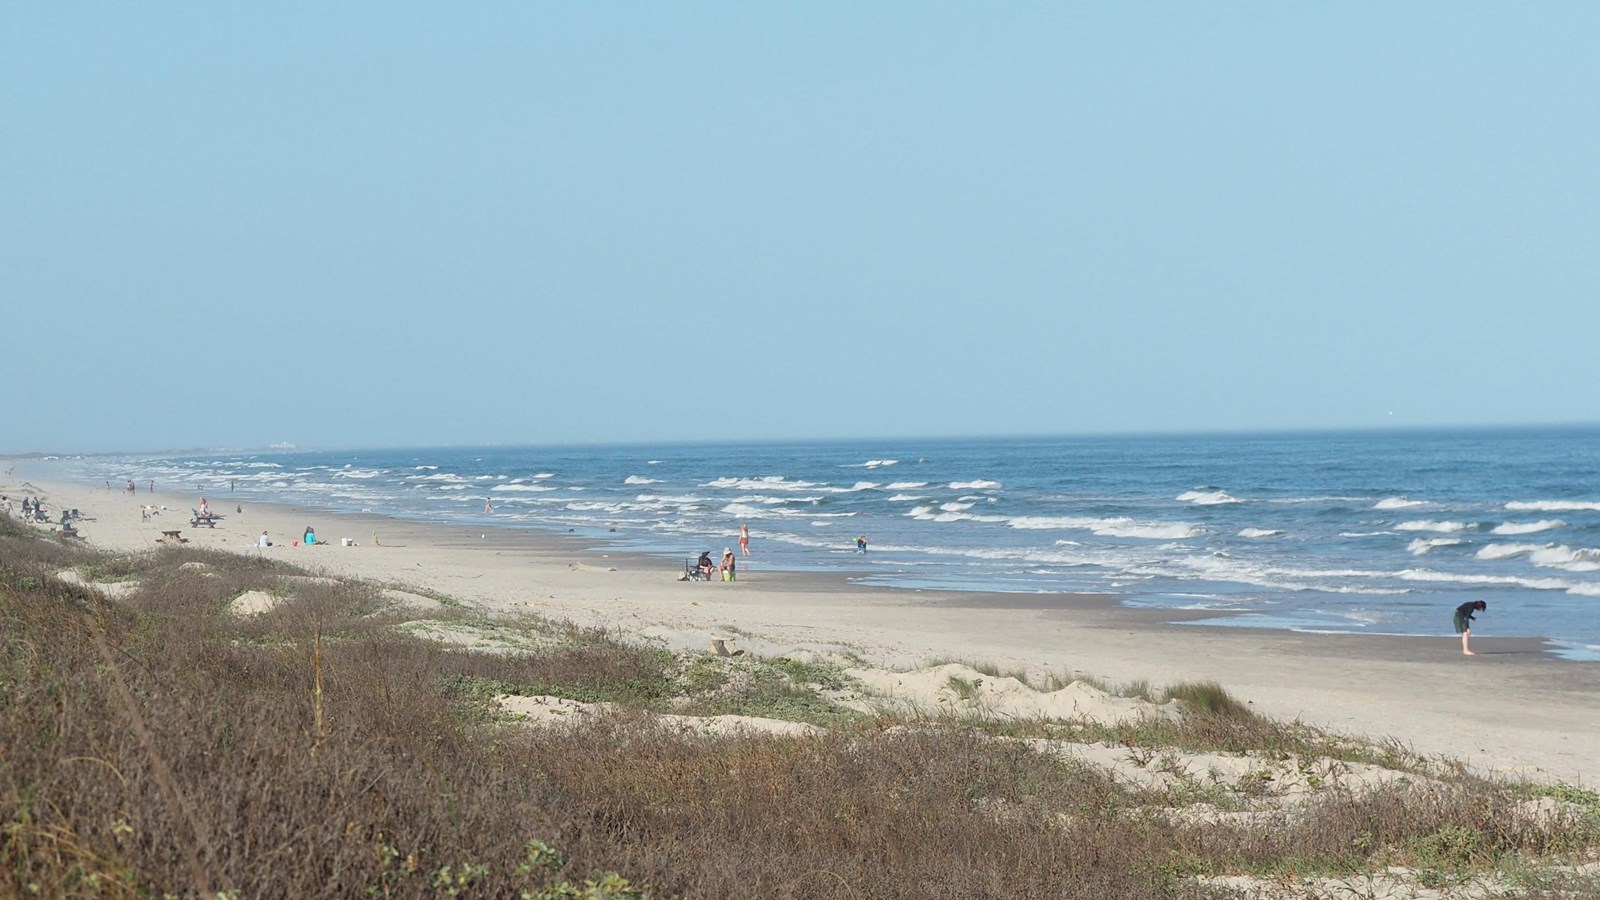 Several people play and walk along the beach.